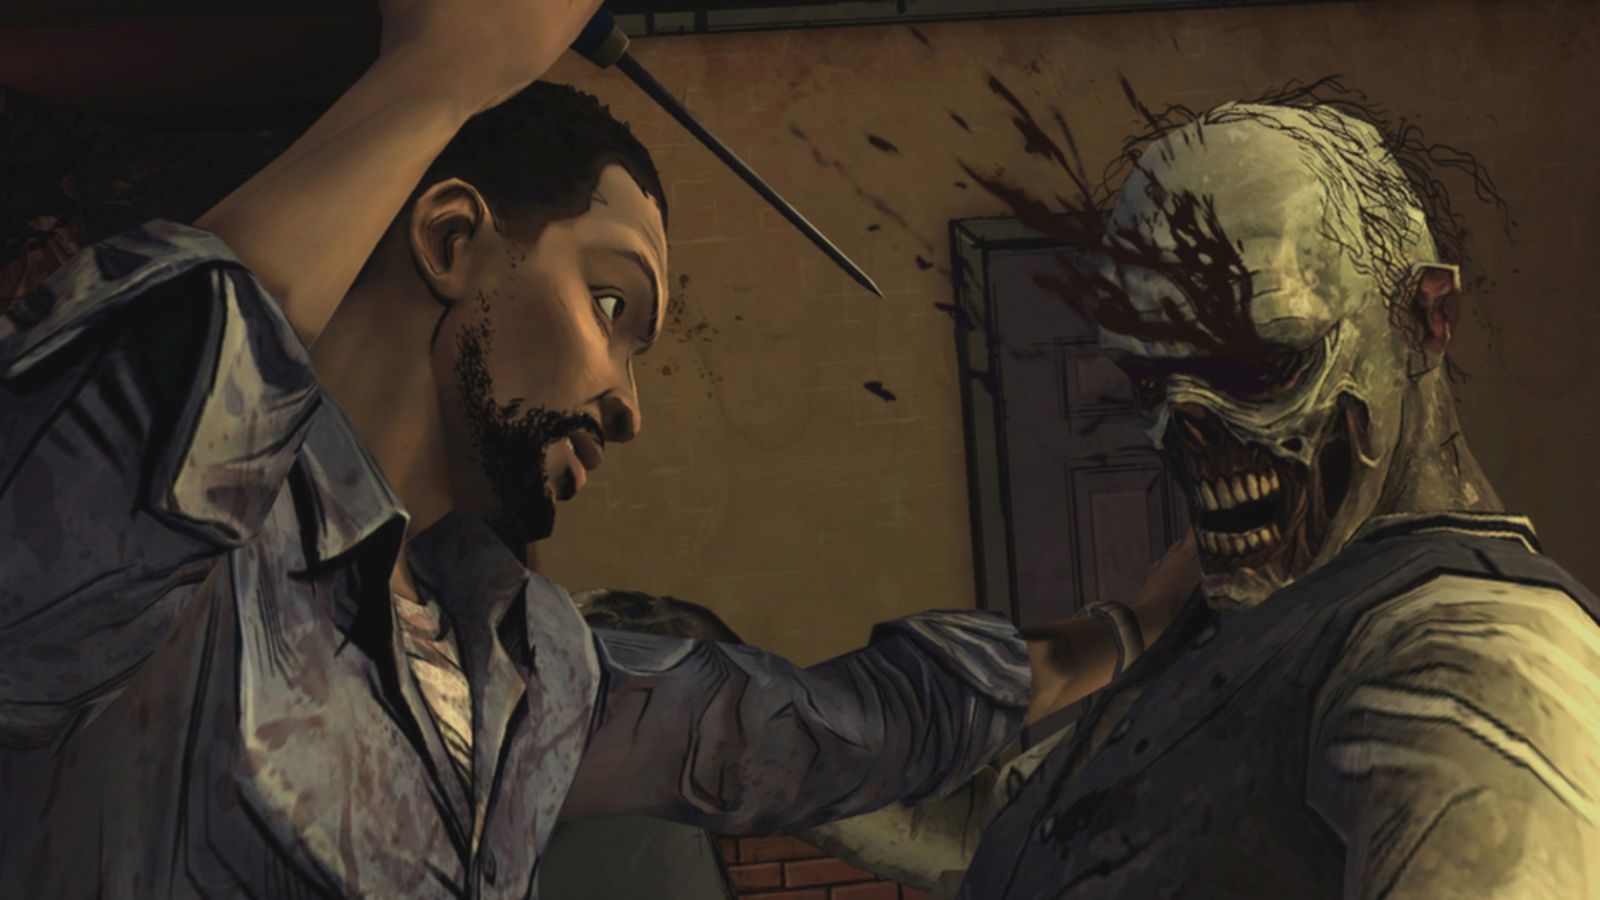 Screenshot from The Walking Dead, showing Lee stabbing a zombie in the eye